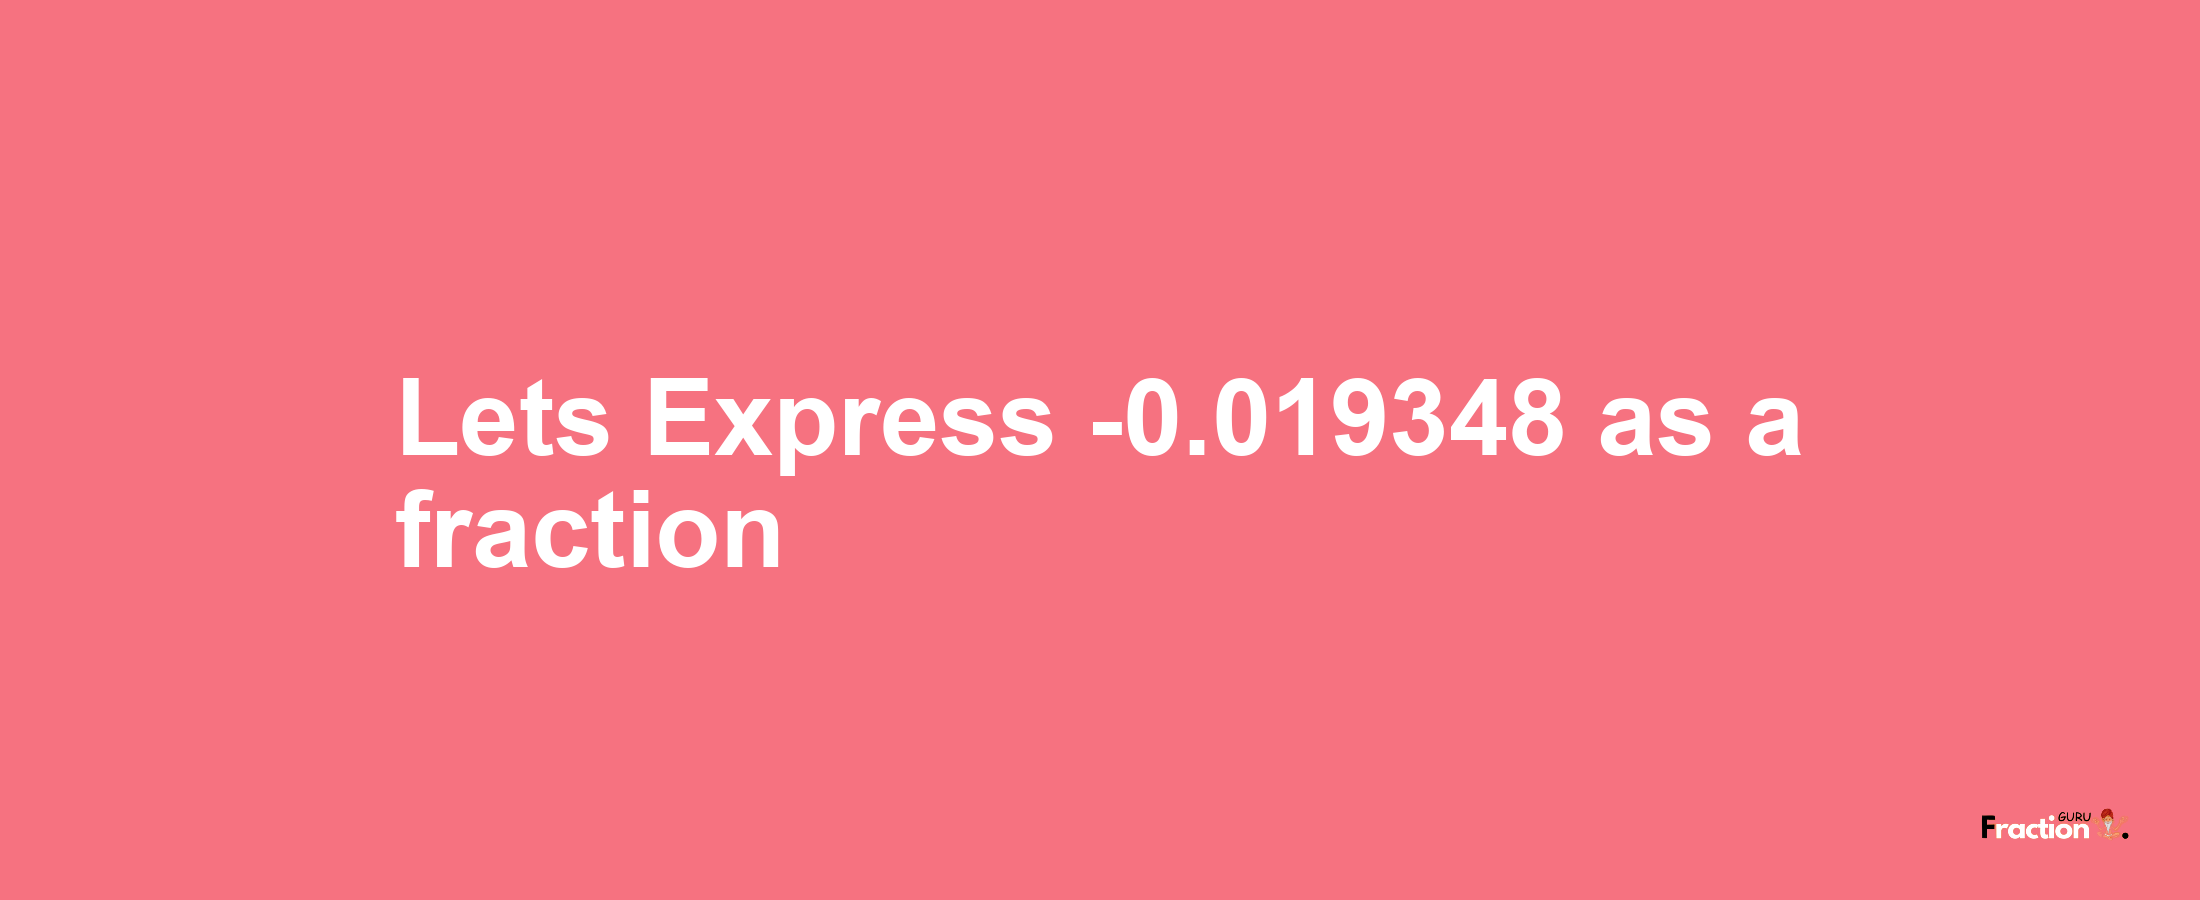 Lets Express -0.019348 as afraction